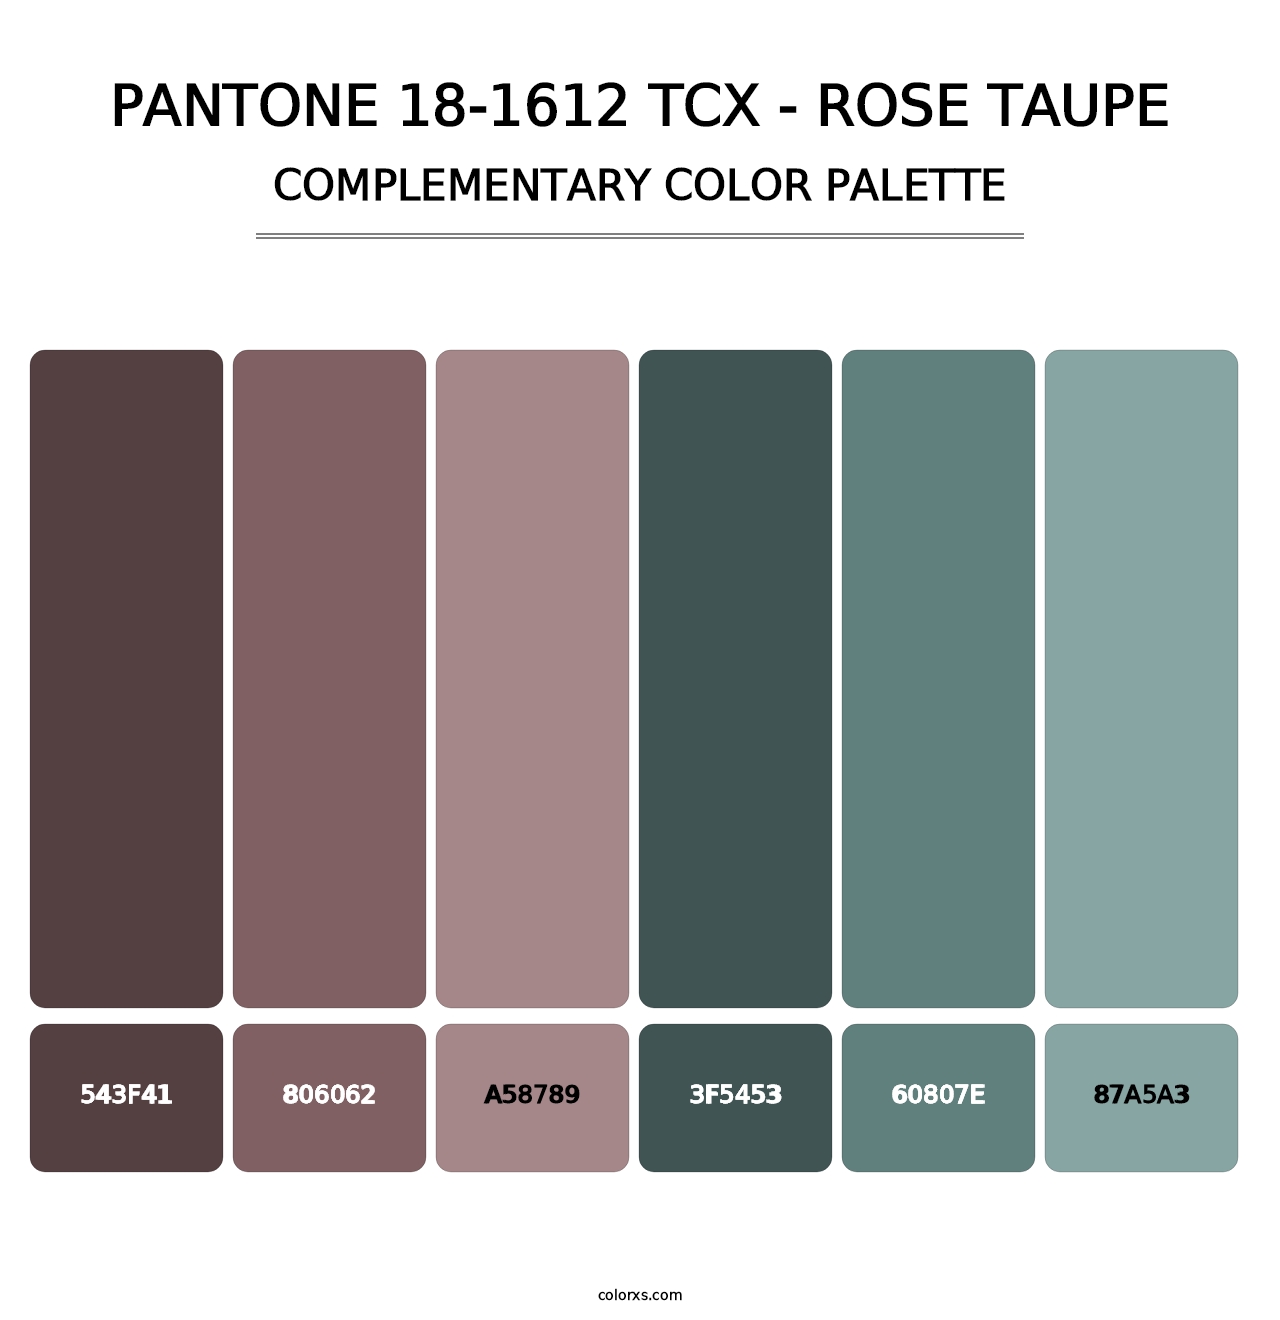 PANTONE 18-1612 TCX - Rose Taupe - Complementary Color Palette